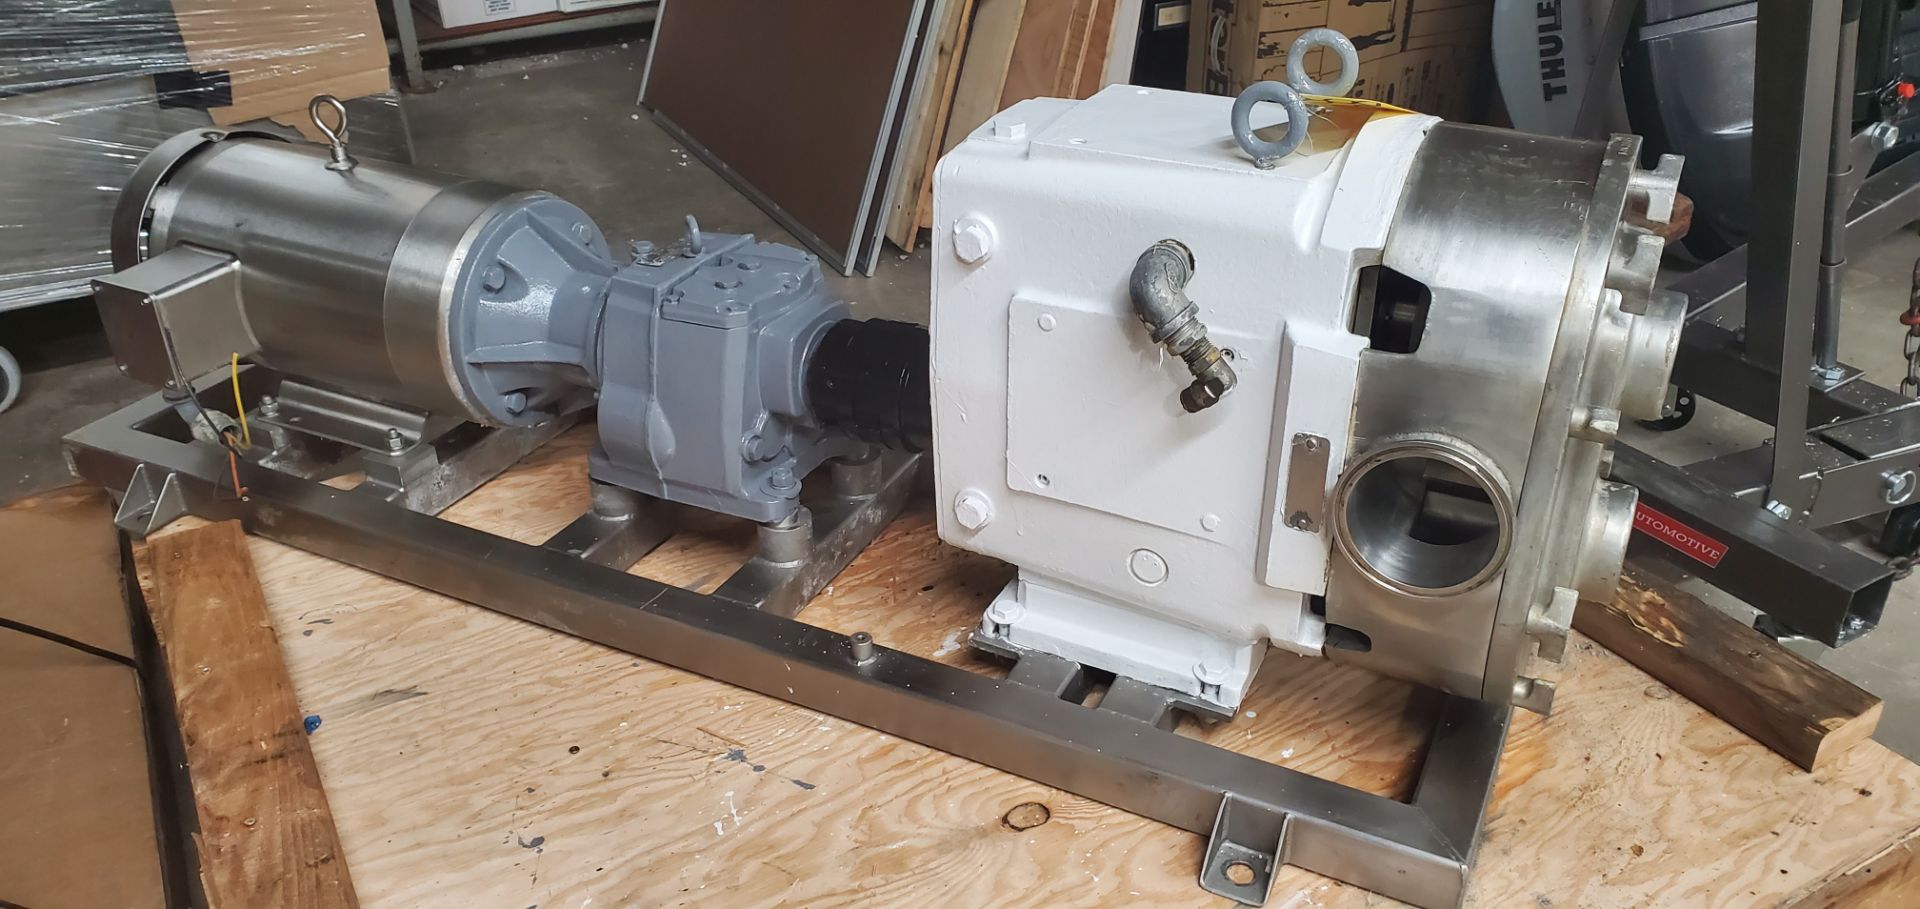 Size 220 Positive Displacement Pump with S/S Clad Baldor 7.5 HP Motor Mounted on S/S Frame - Rigging